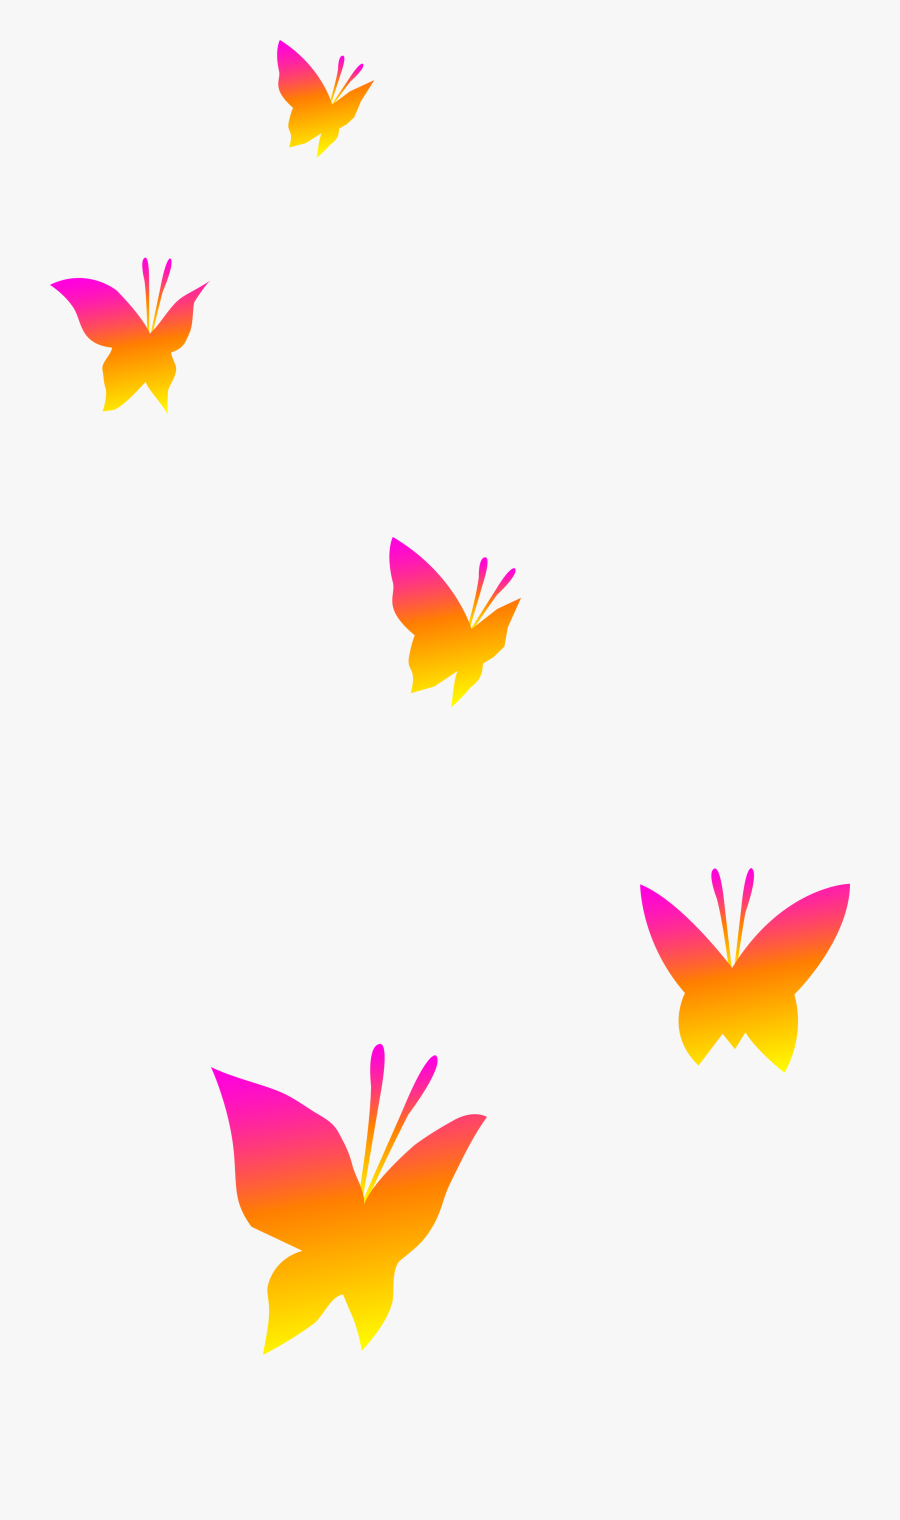 Flower With Butterfly Clipart - Transparent Background Butterflies Clipart, Transparent Clipart